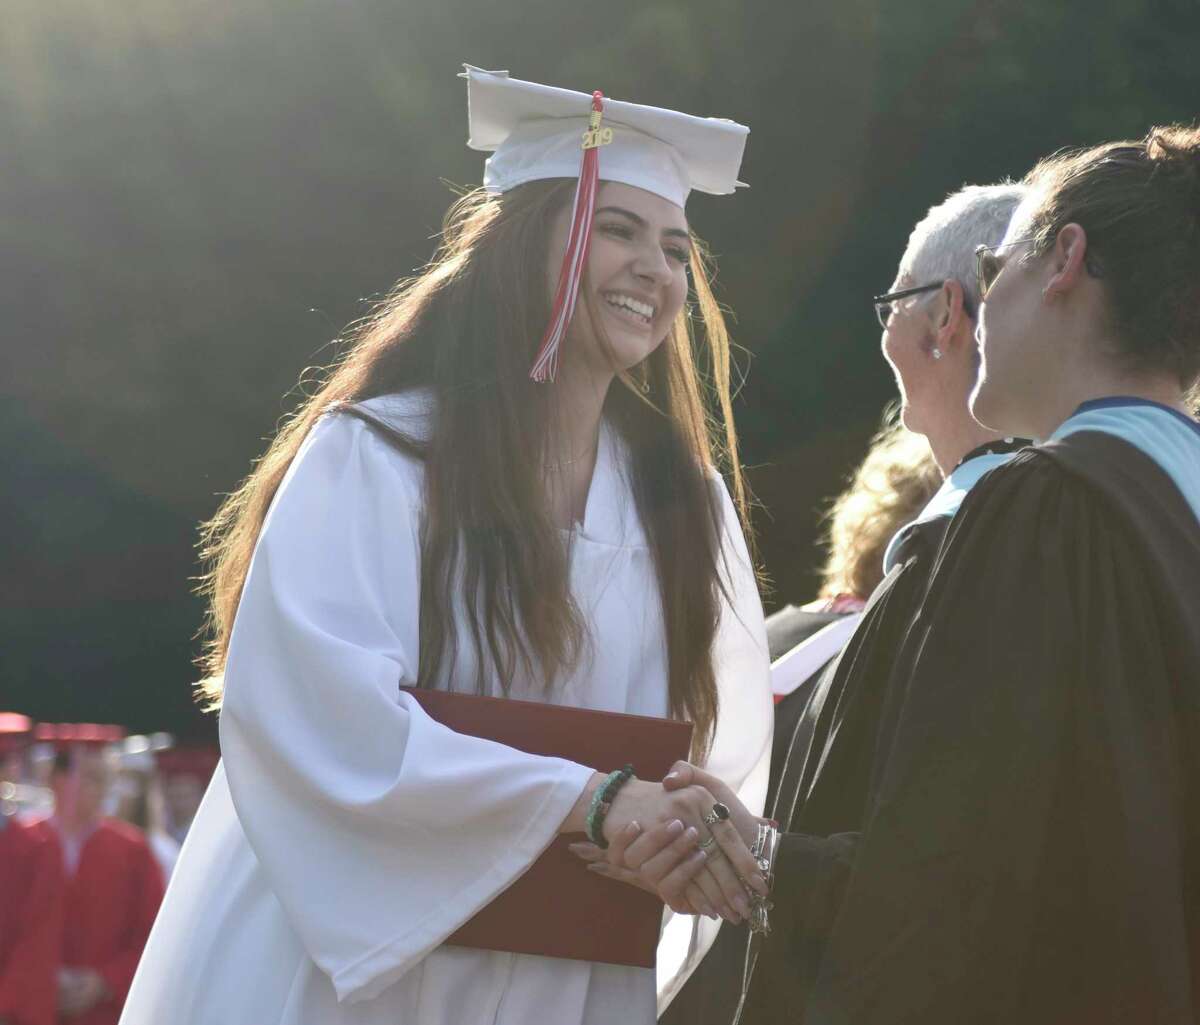 Photos from the 2019 Graduation at Greenwich's High School's Cardinal Stadium in Greenwich, Conn. Monday, June 17, 2019. Emmy-winning musician and composer Rob Mathes, GHS Class of 1981, delivered the commencement speech as 677 students received their diplomas.